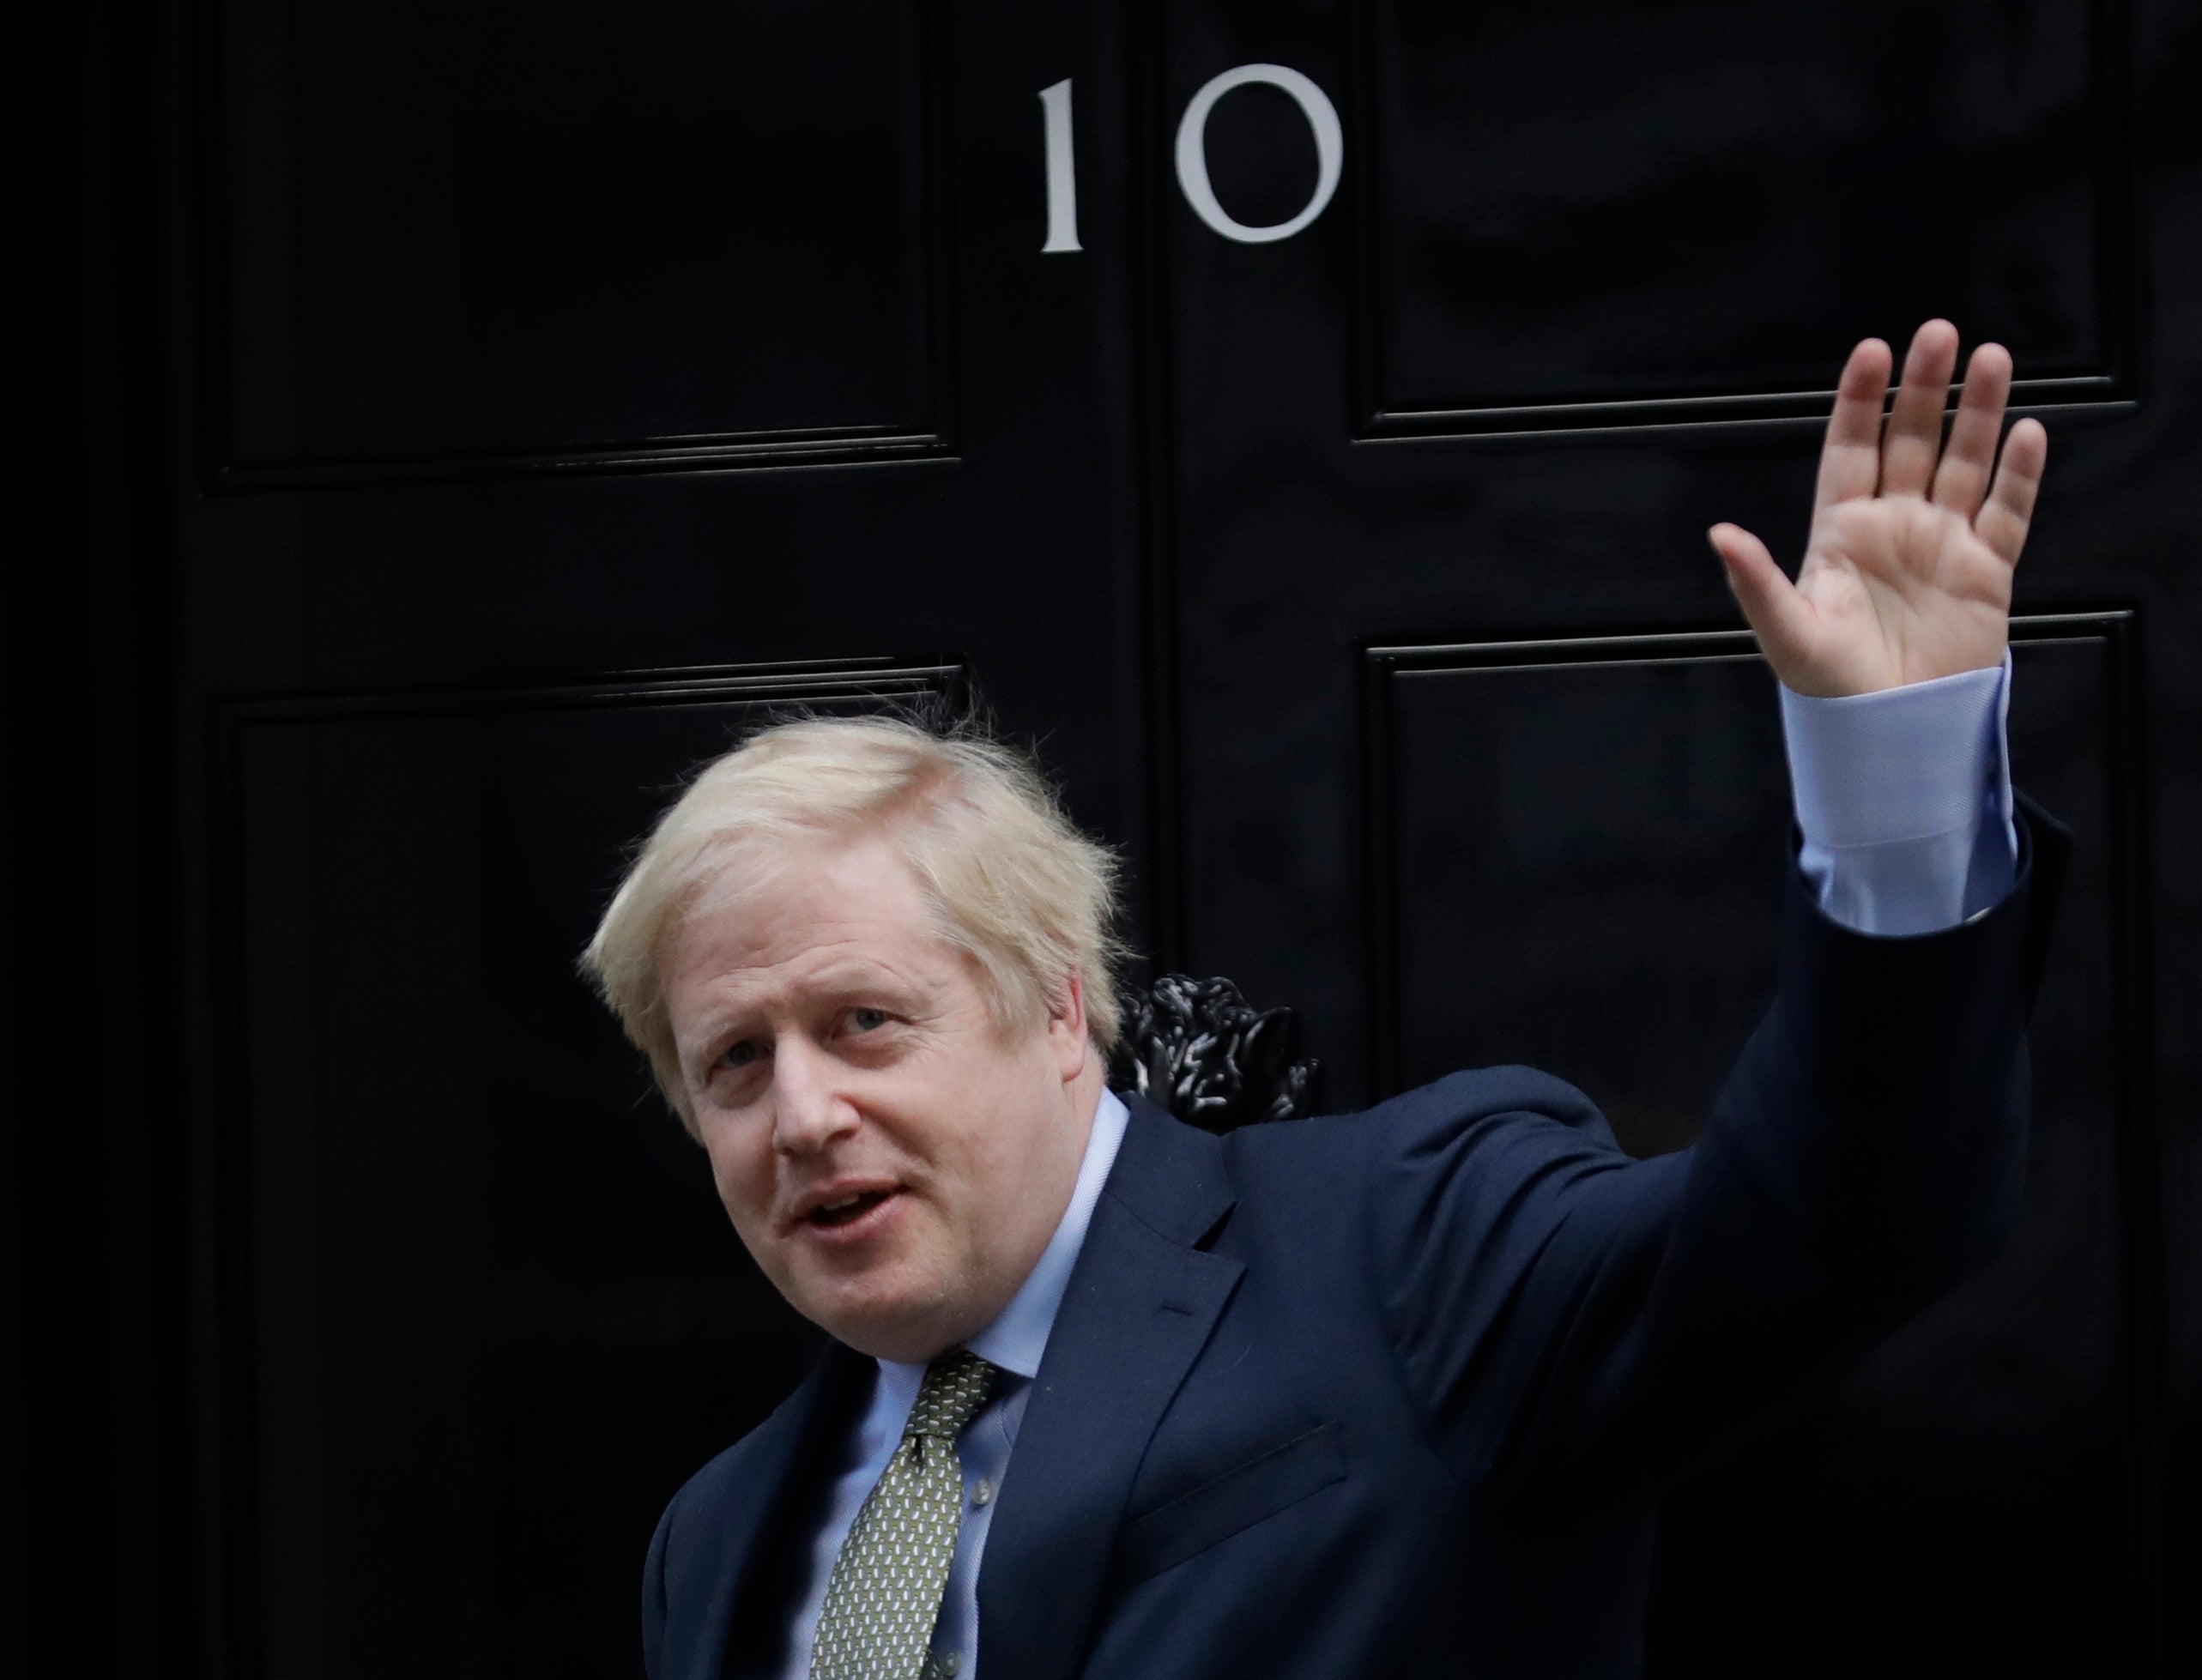 The final days of Boris Johnson’s leadership have brought a distrust and sleaze that has trashed the Tory brand